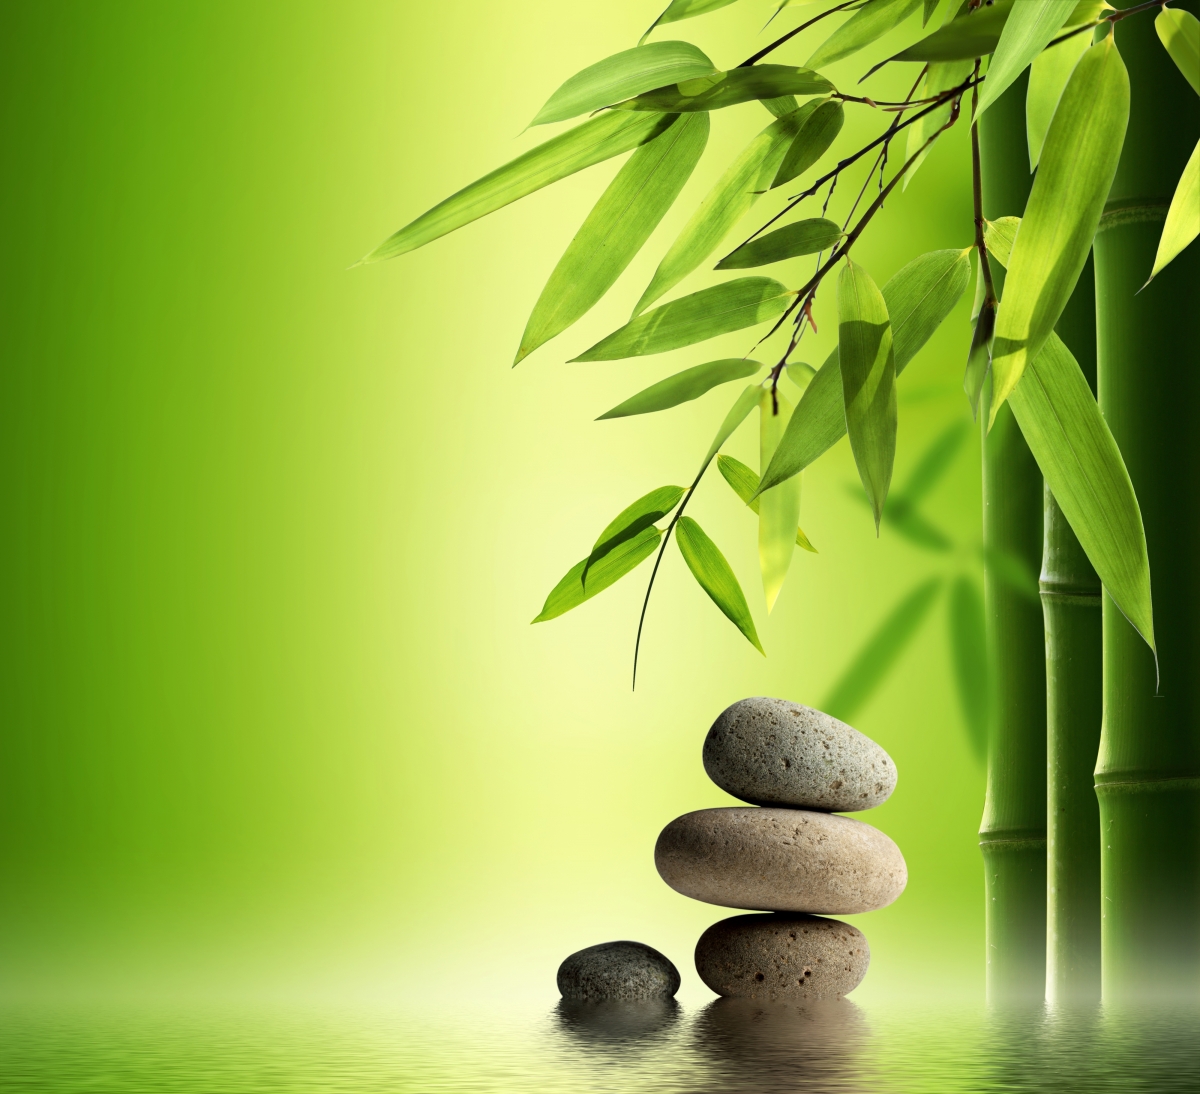 Bamboo, stones, water, green background illustration